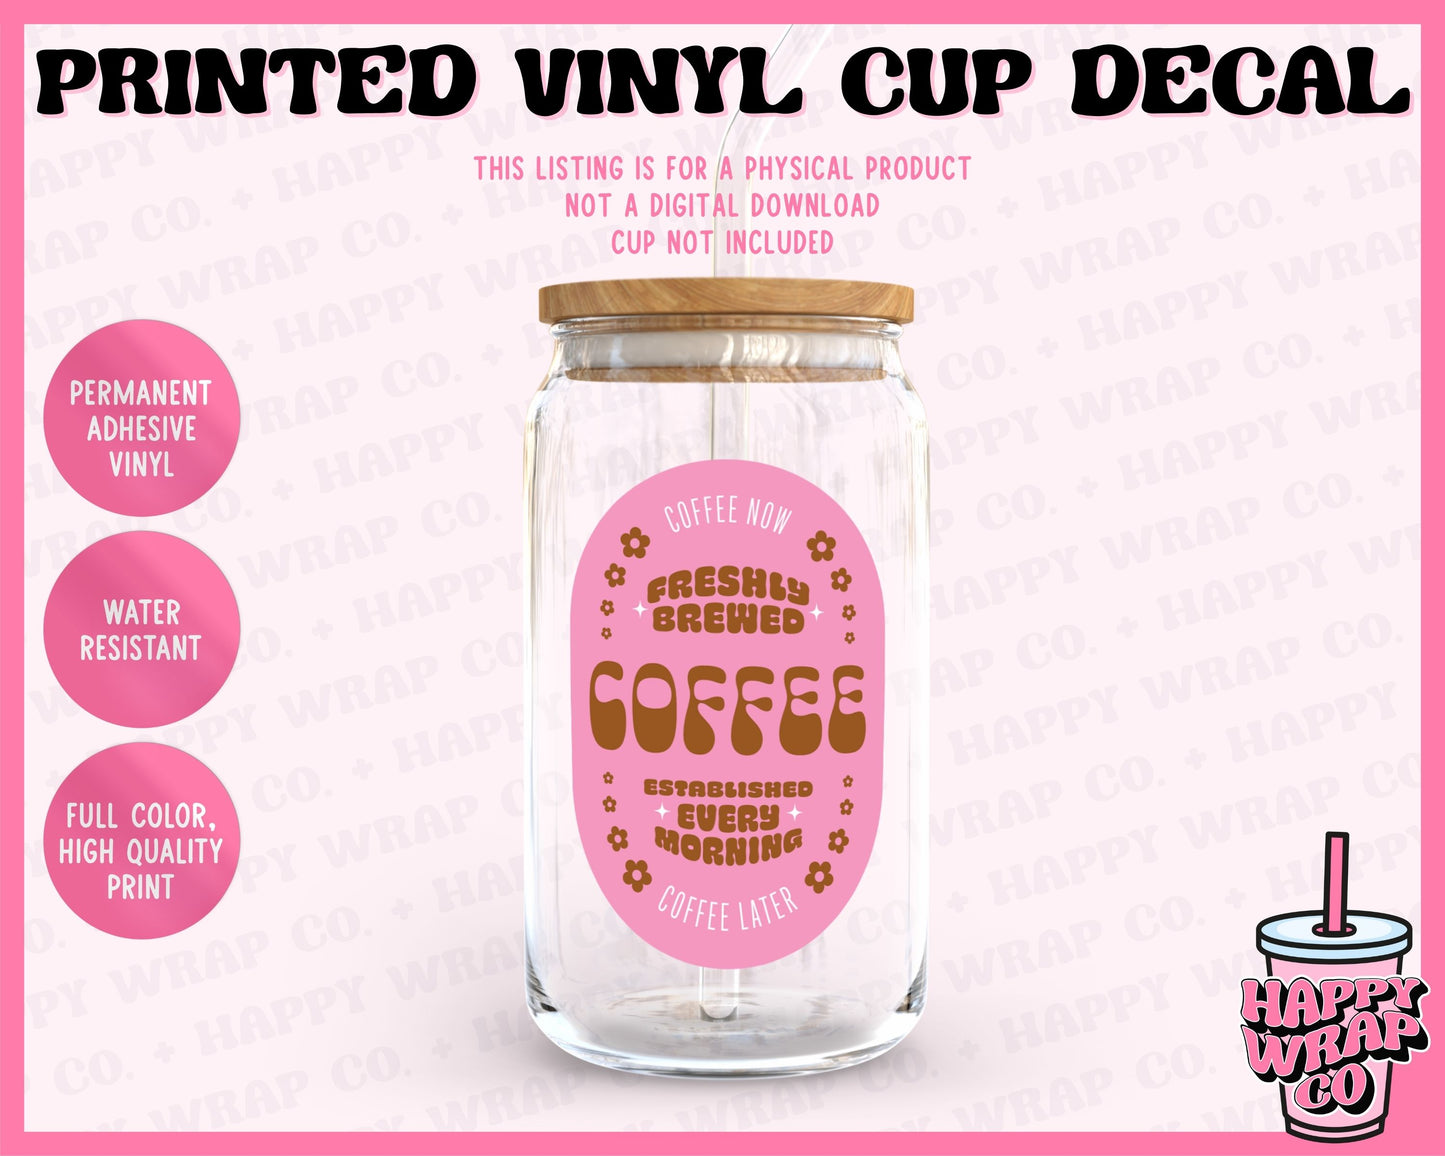 Retro Coffee Now Coffee Later - Vinyl Cup Decal